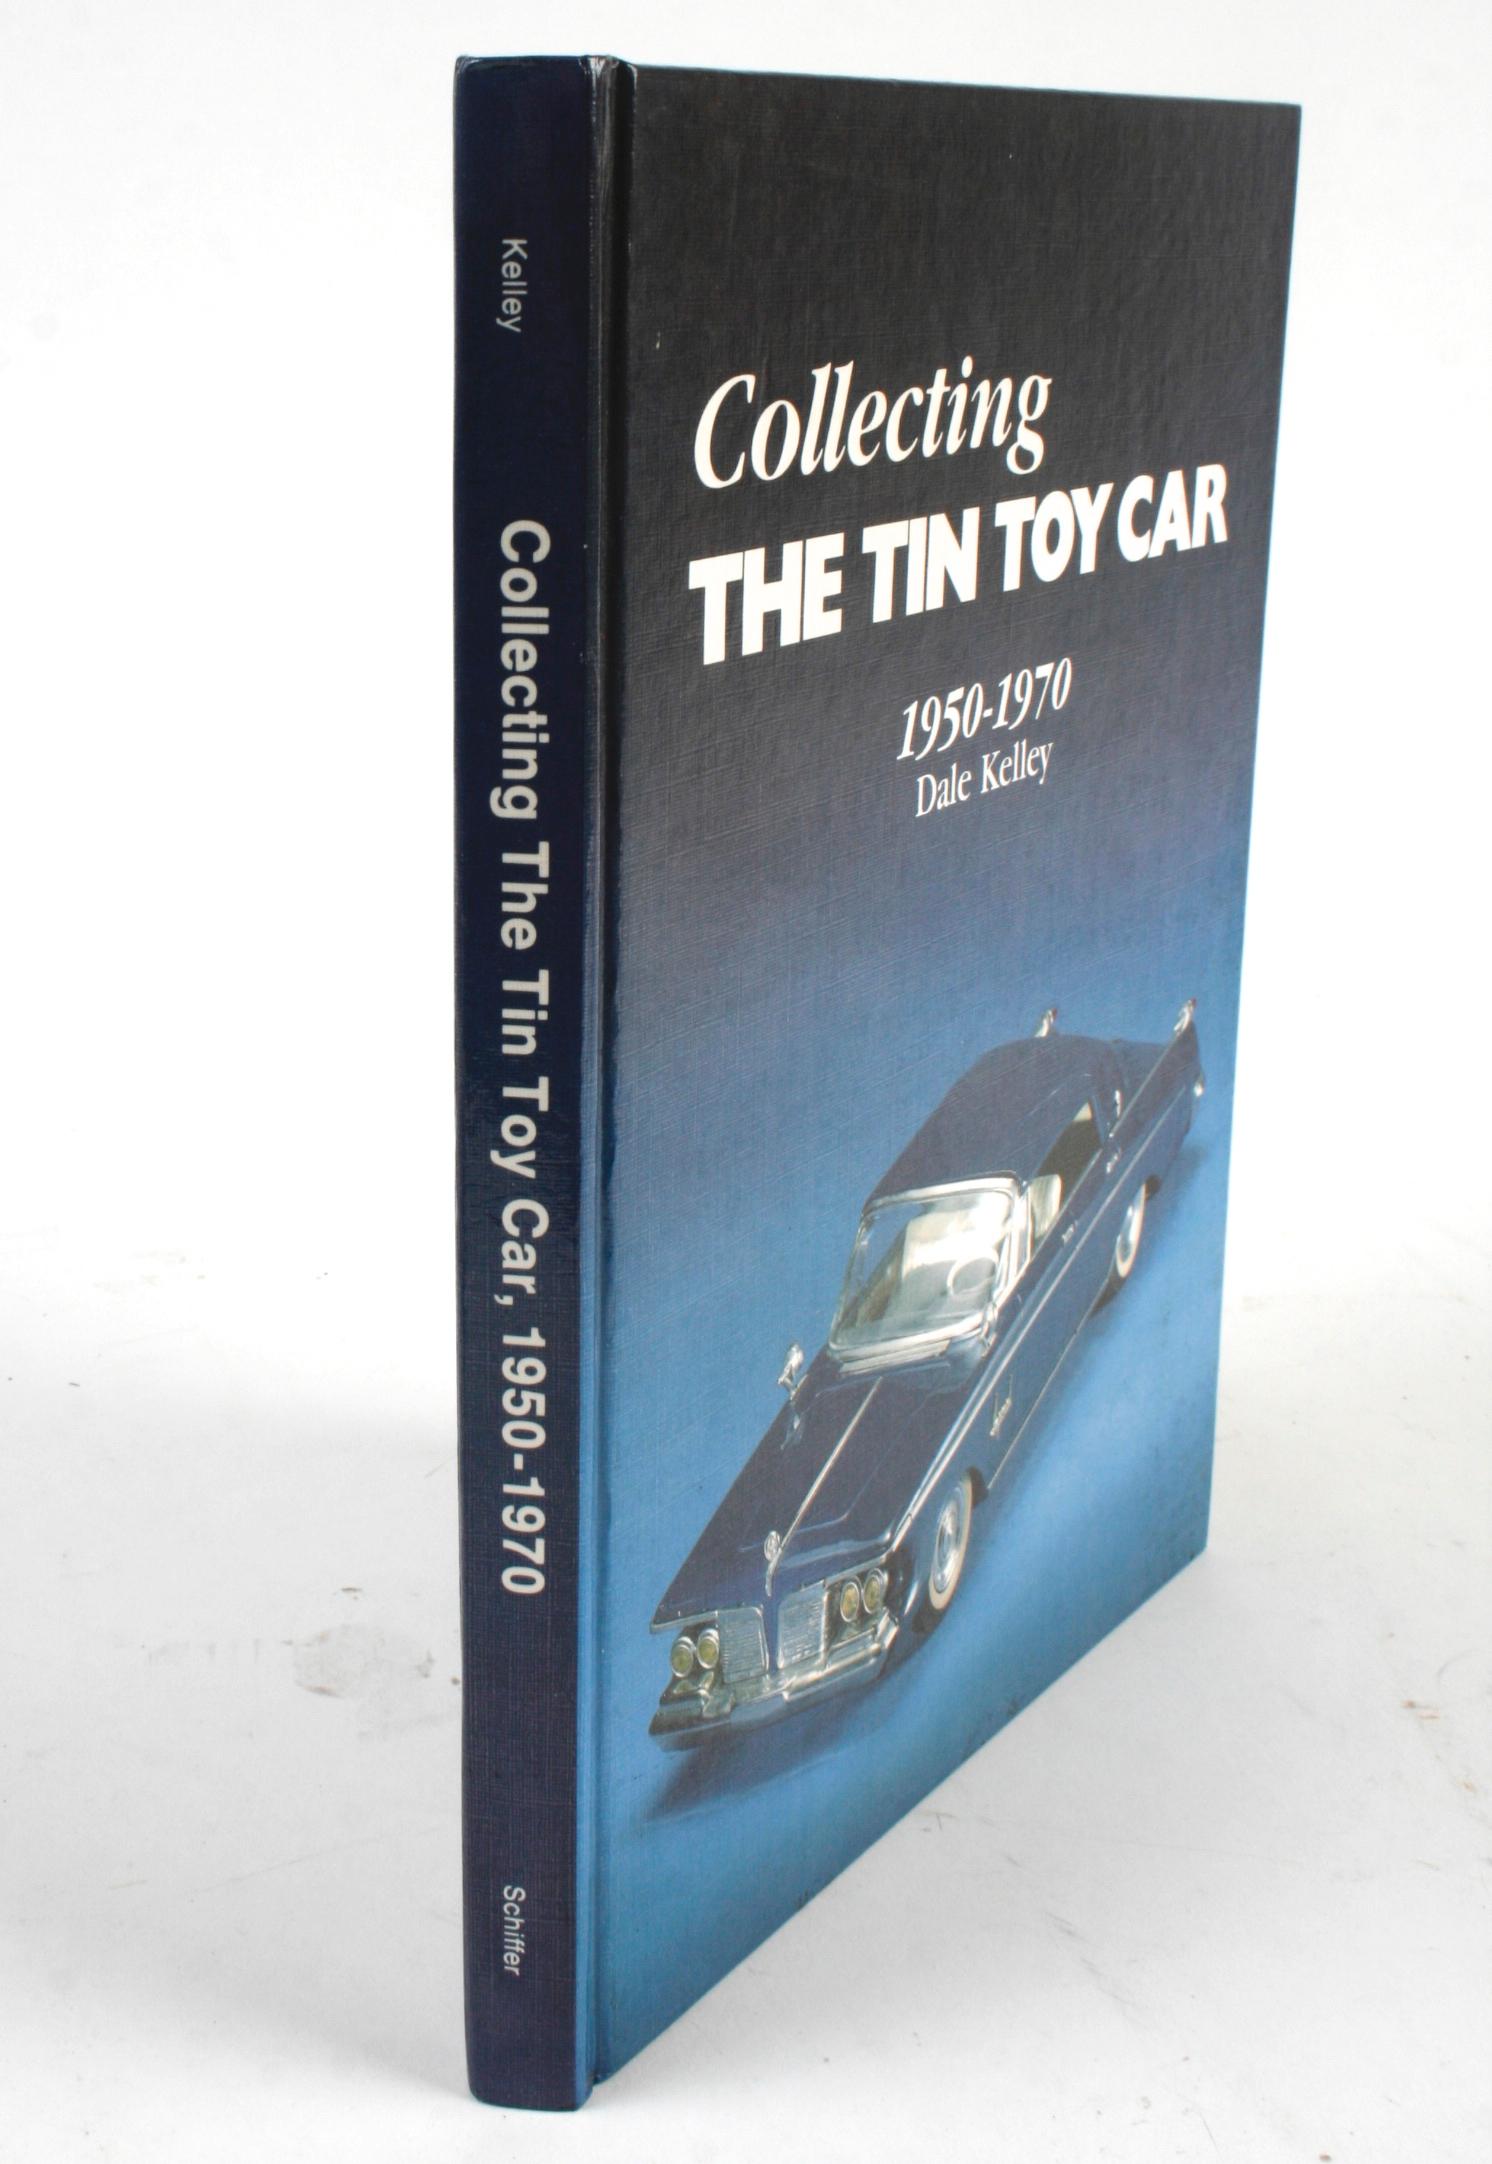 Collecting the Tin Toy Car, 1950-1970 by Dale Kelley, 1st Edition 11